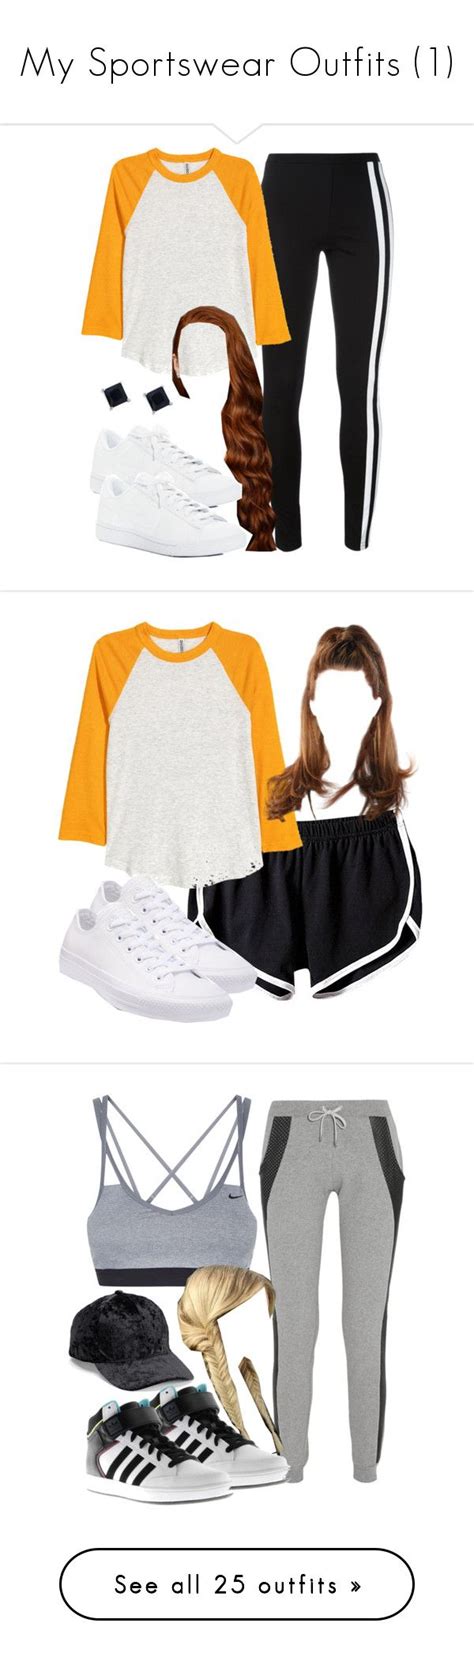 My Sportswear Outfits 1 By Demiwitch Of Mischief Liked On Polyvore